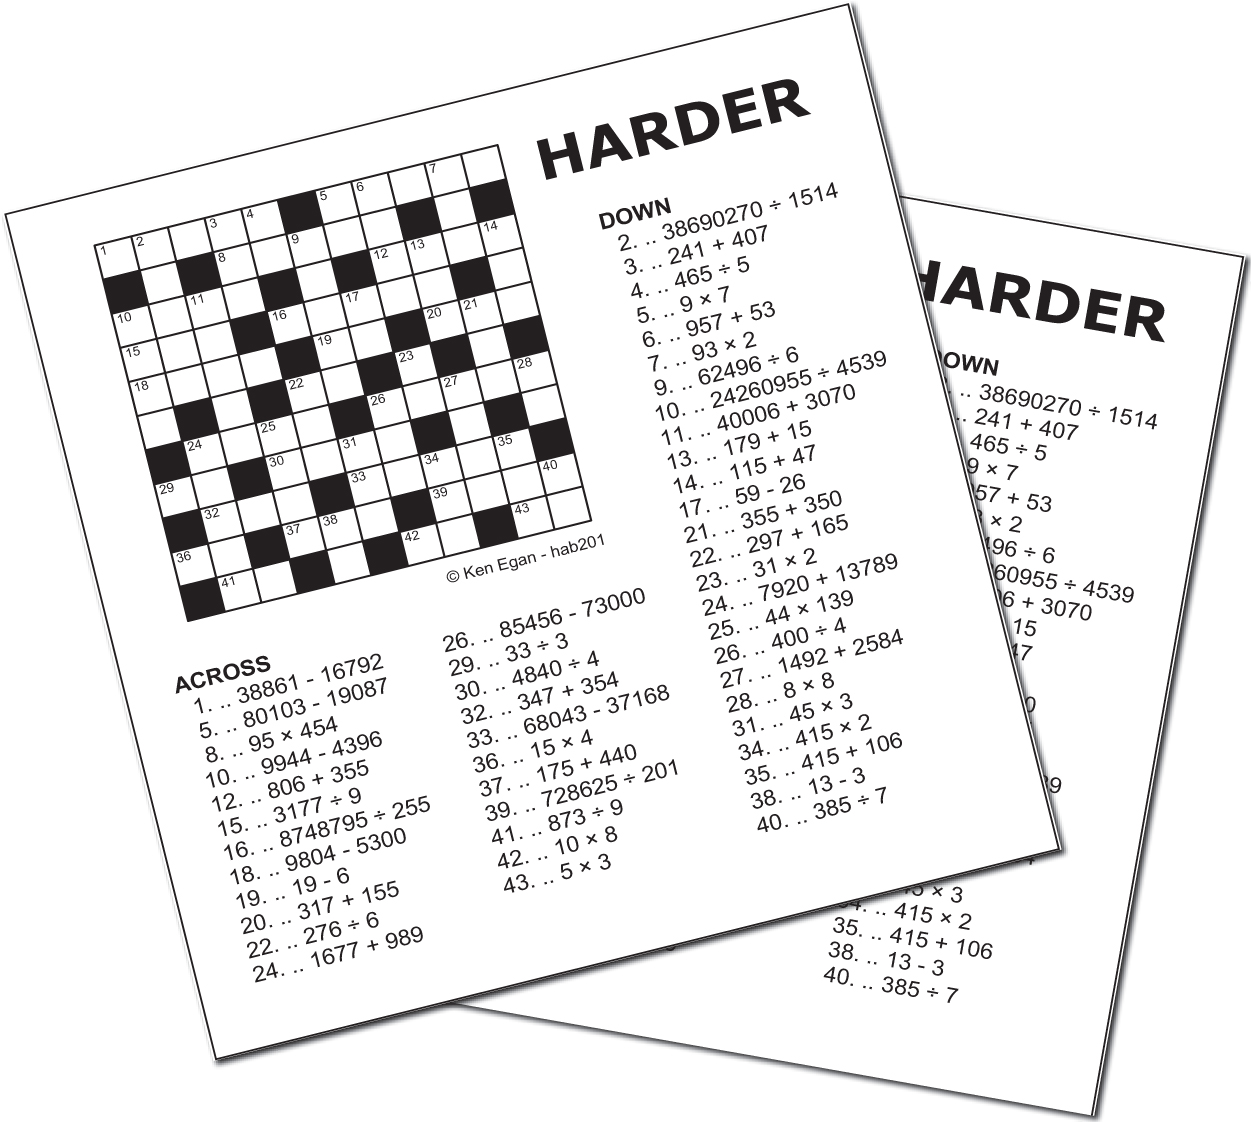 Thumbnail for 20 HARDER PUZZLE BOOKLET 02